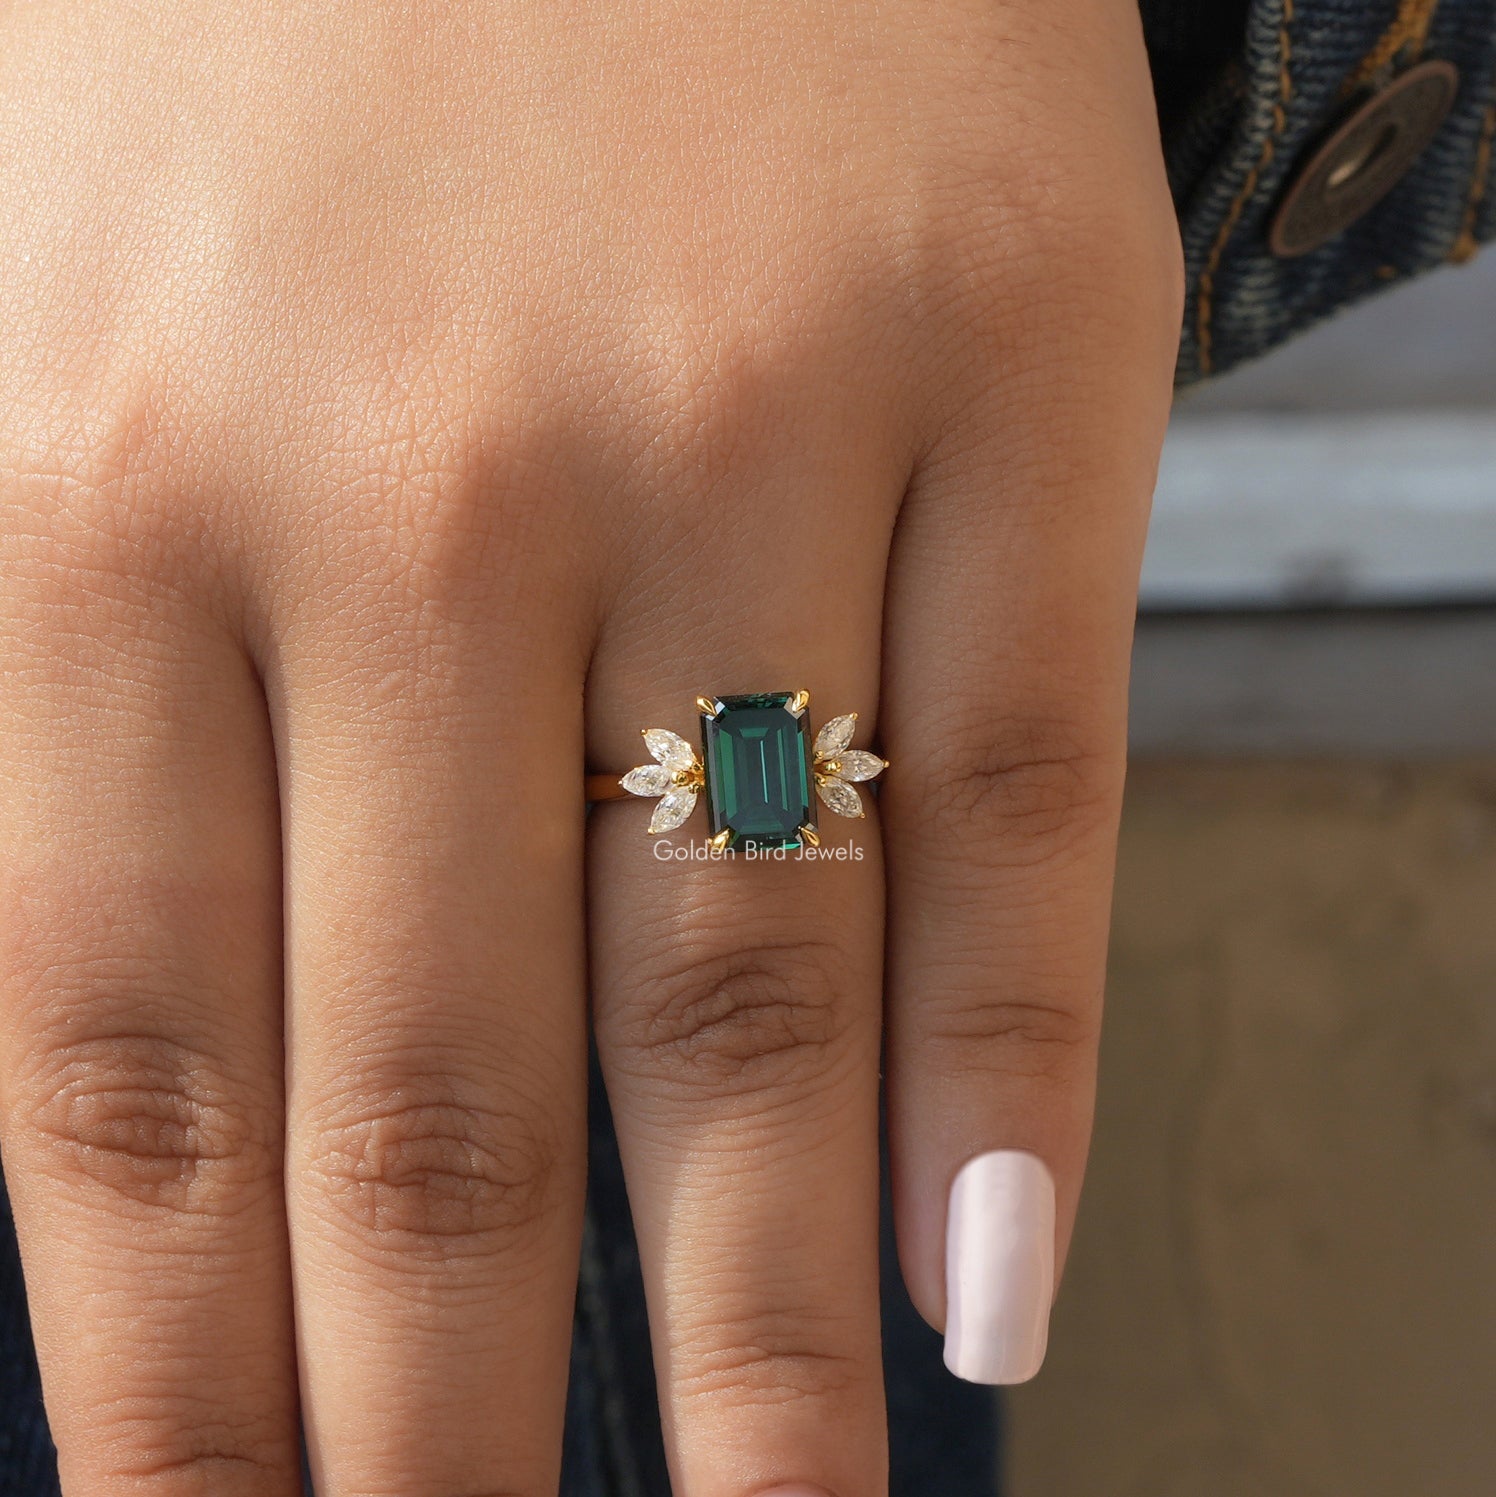 [In finger front view of dark green emerald cut moissanite ring crafted with 14k yellow gold]-[Golden Bird Jewels]